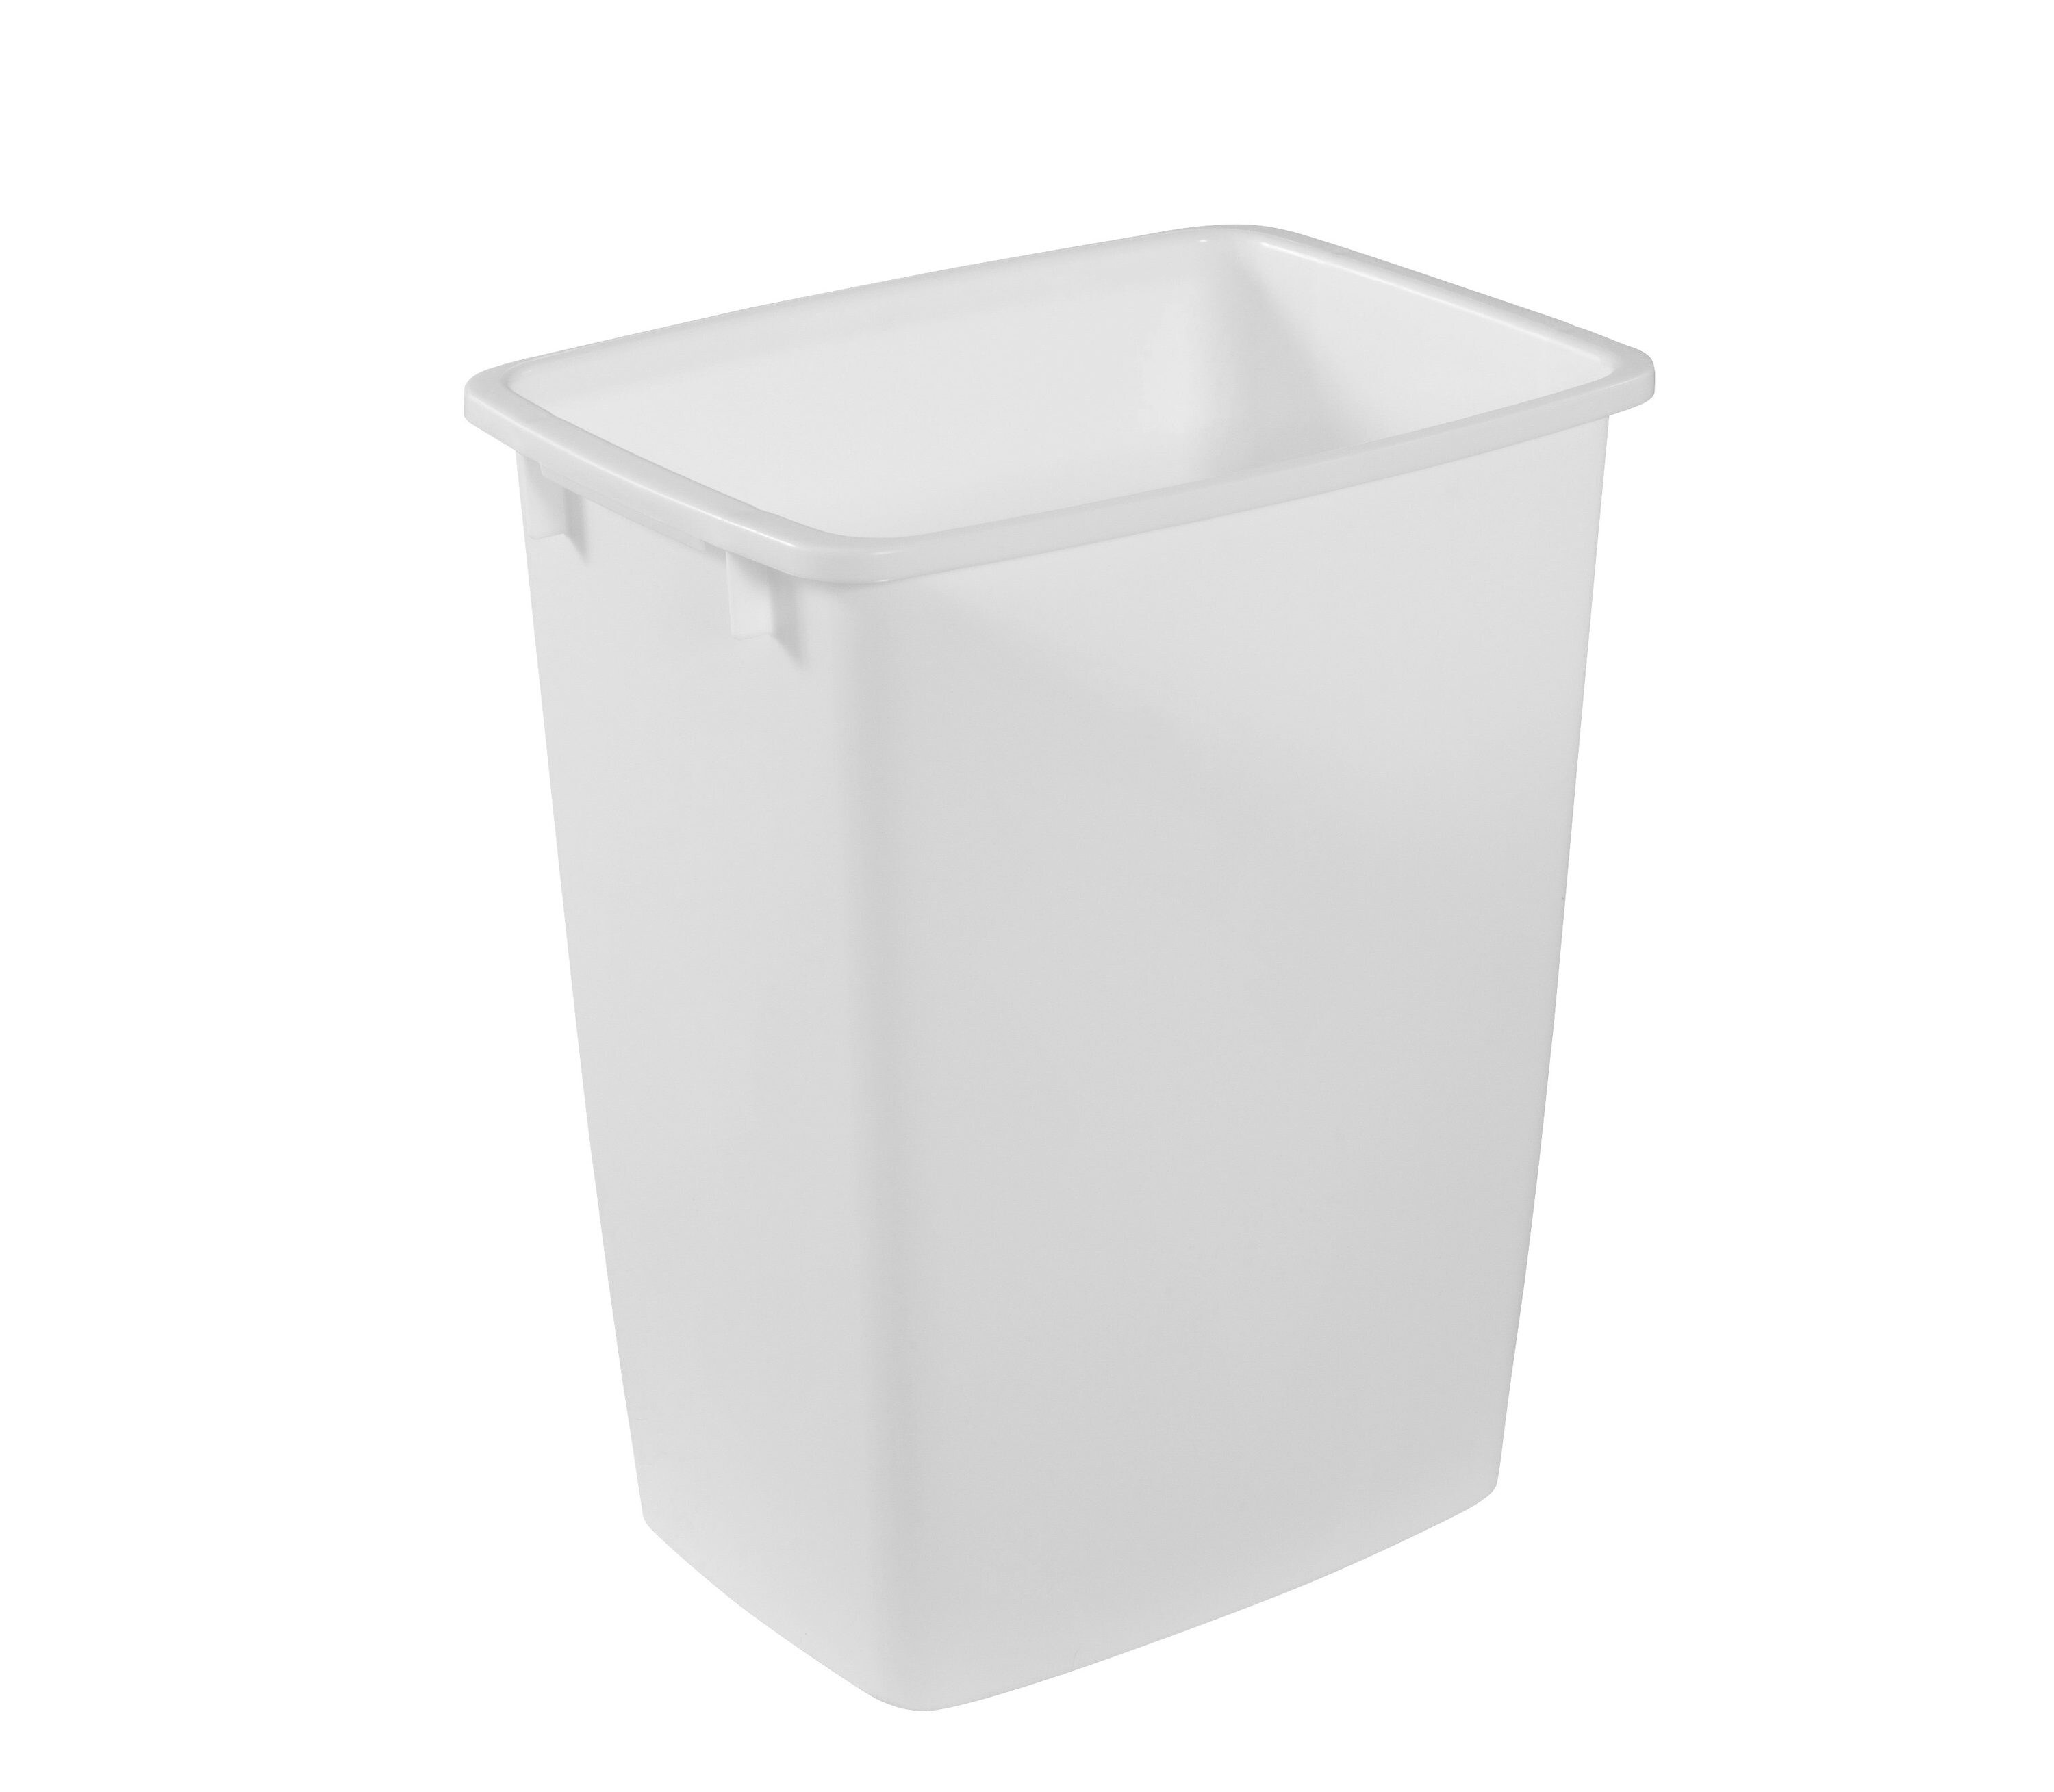 Rubbermaid 11.3 gal Plastic Kitchen Trash Can with Dual Action Lid , White  